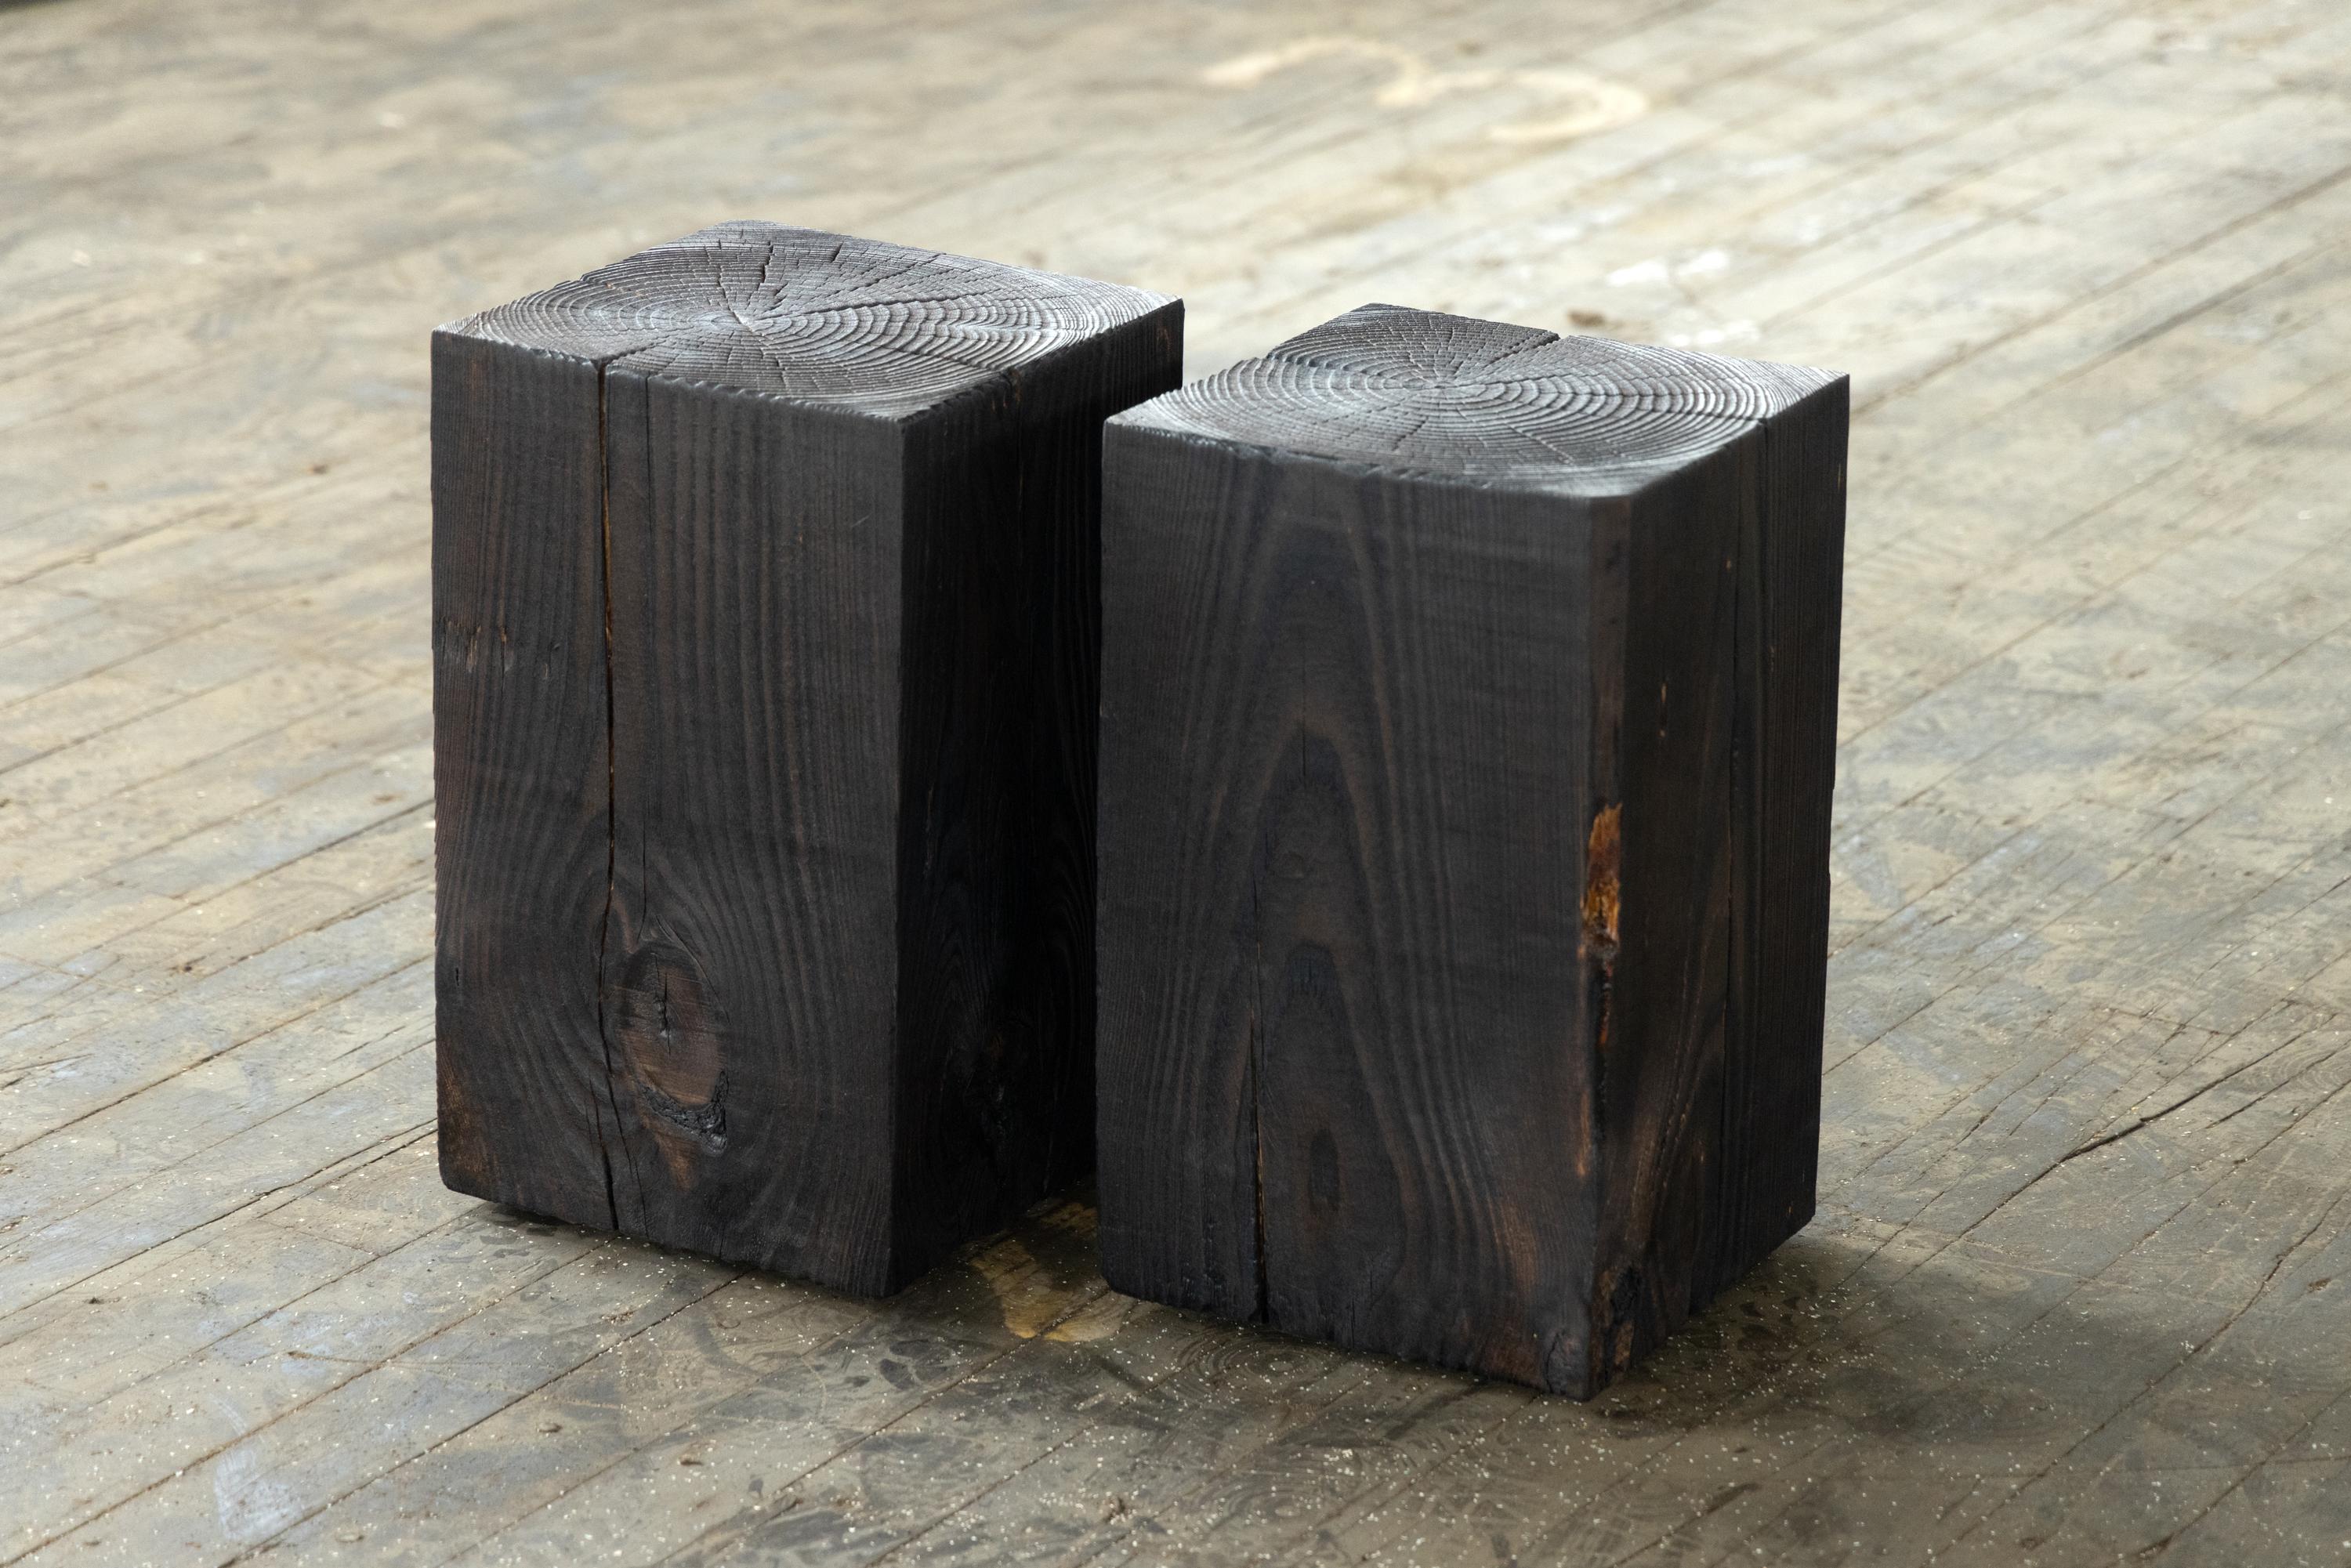 This Asian Style Black Solid Wood Cube Side Table in Shou Sugi Ban is simple and versatile. The sturdy 